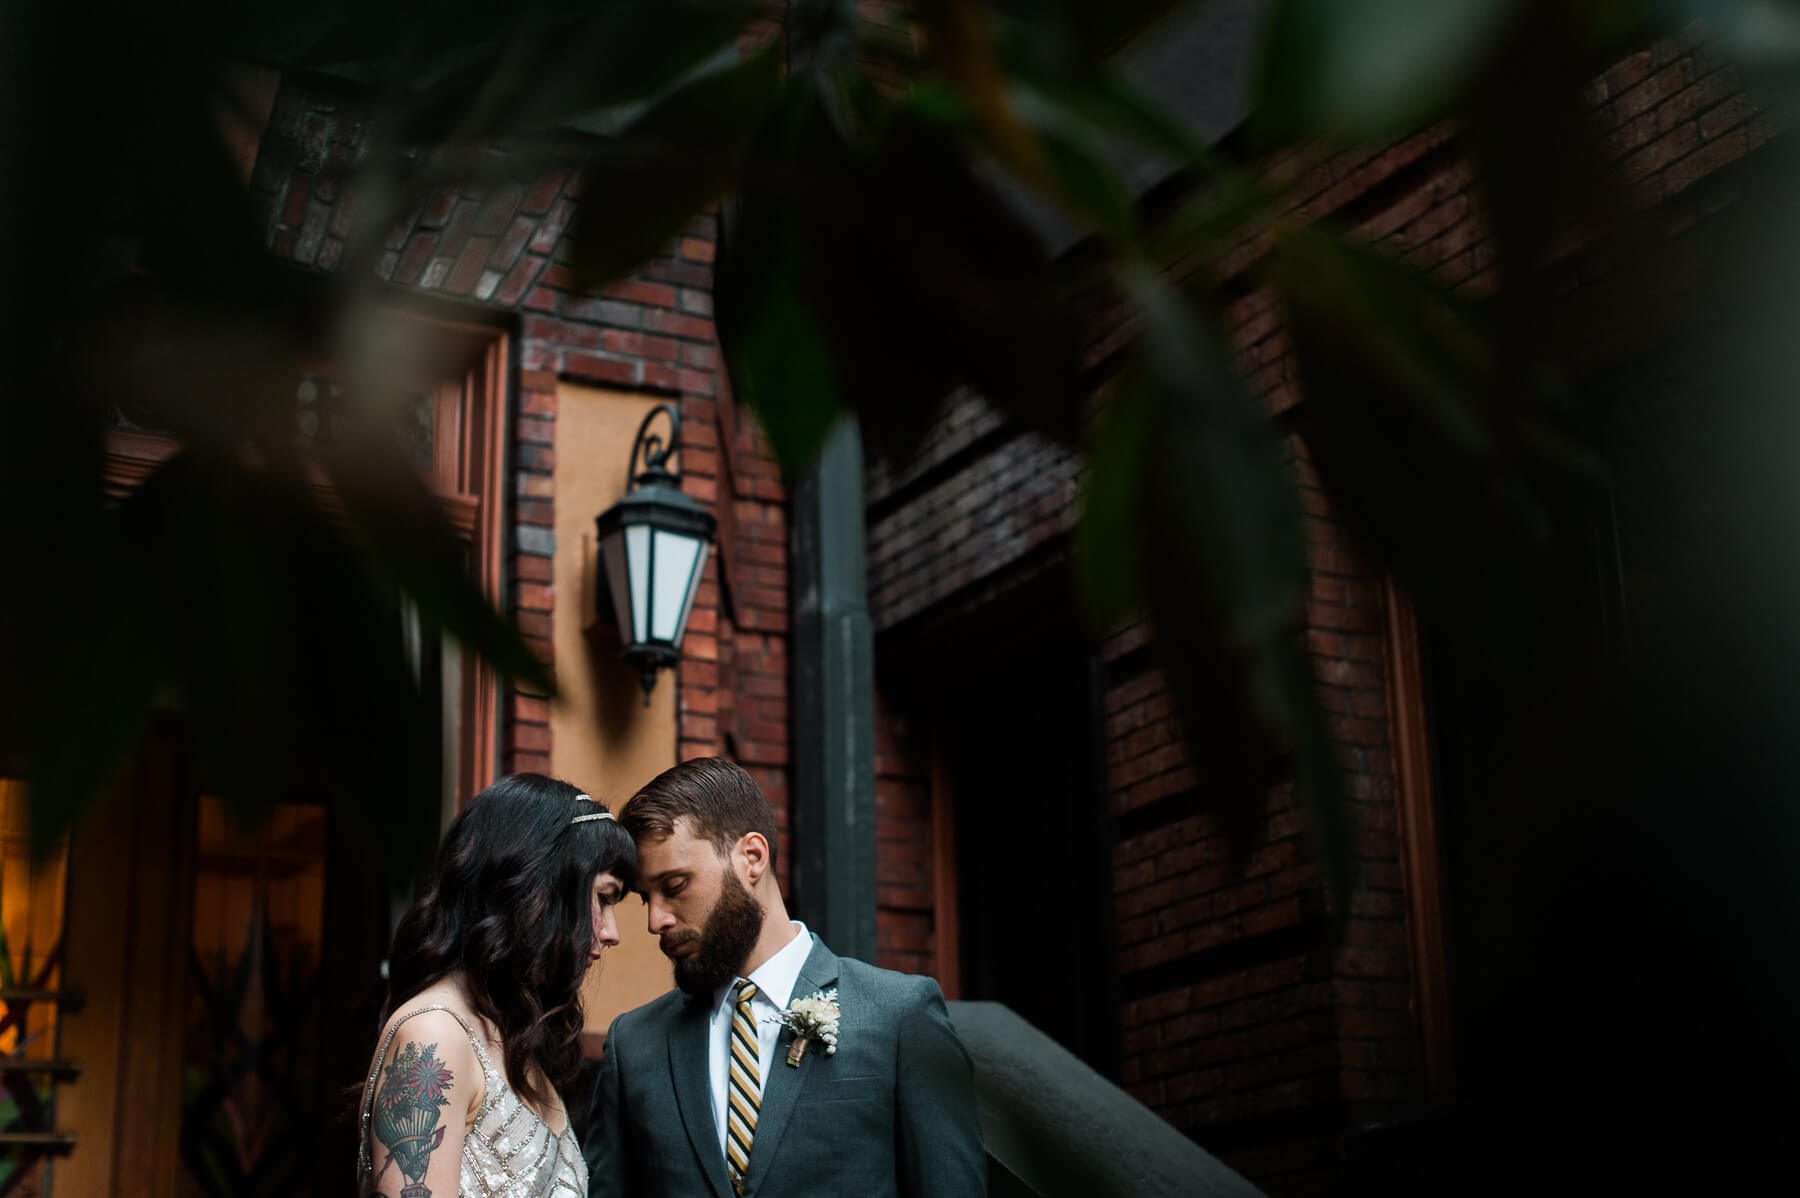 Private moments between a bride and groom in Portland, Oregon. Photographed by local Portland wedding photographer Briana Morrison